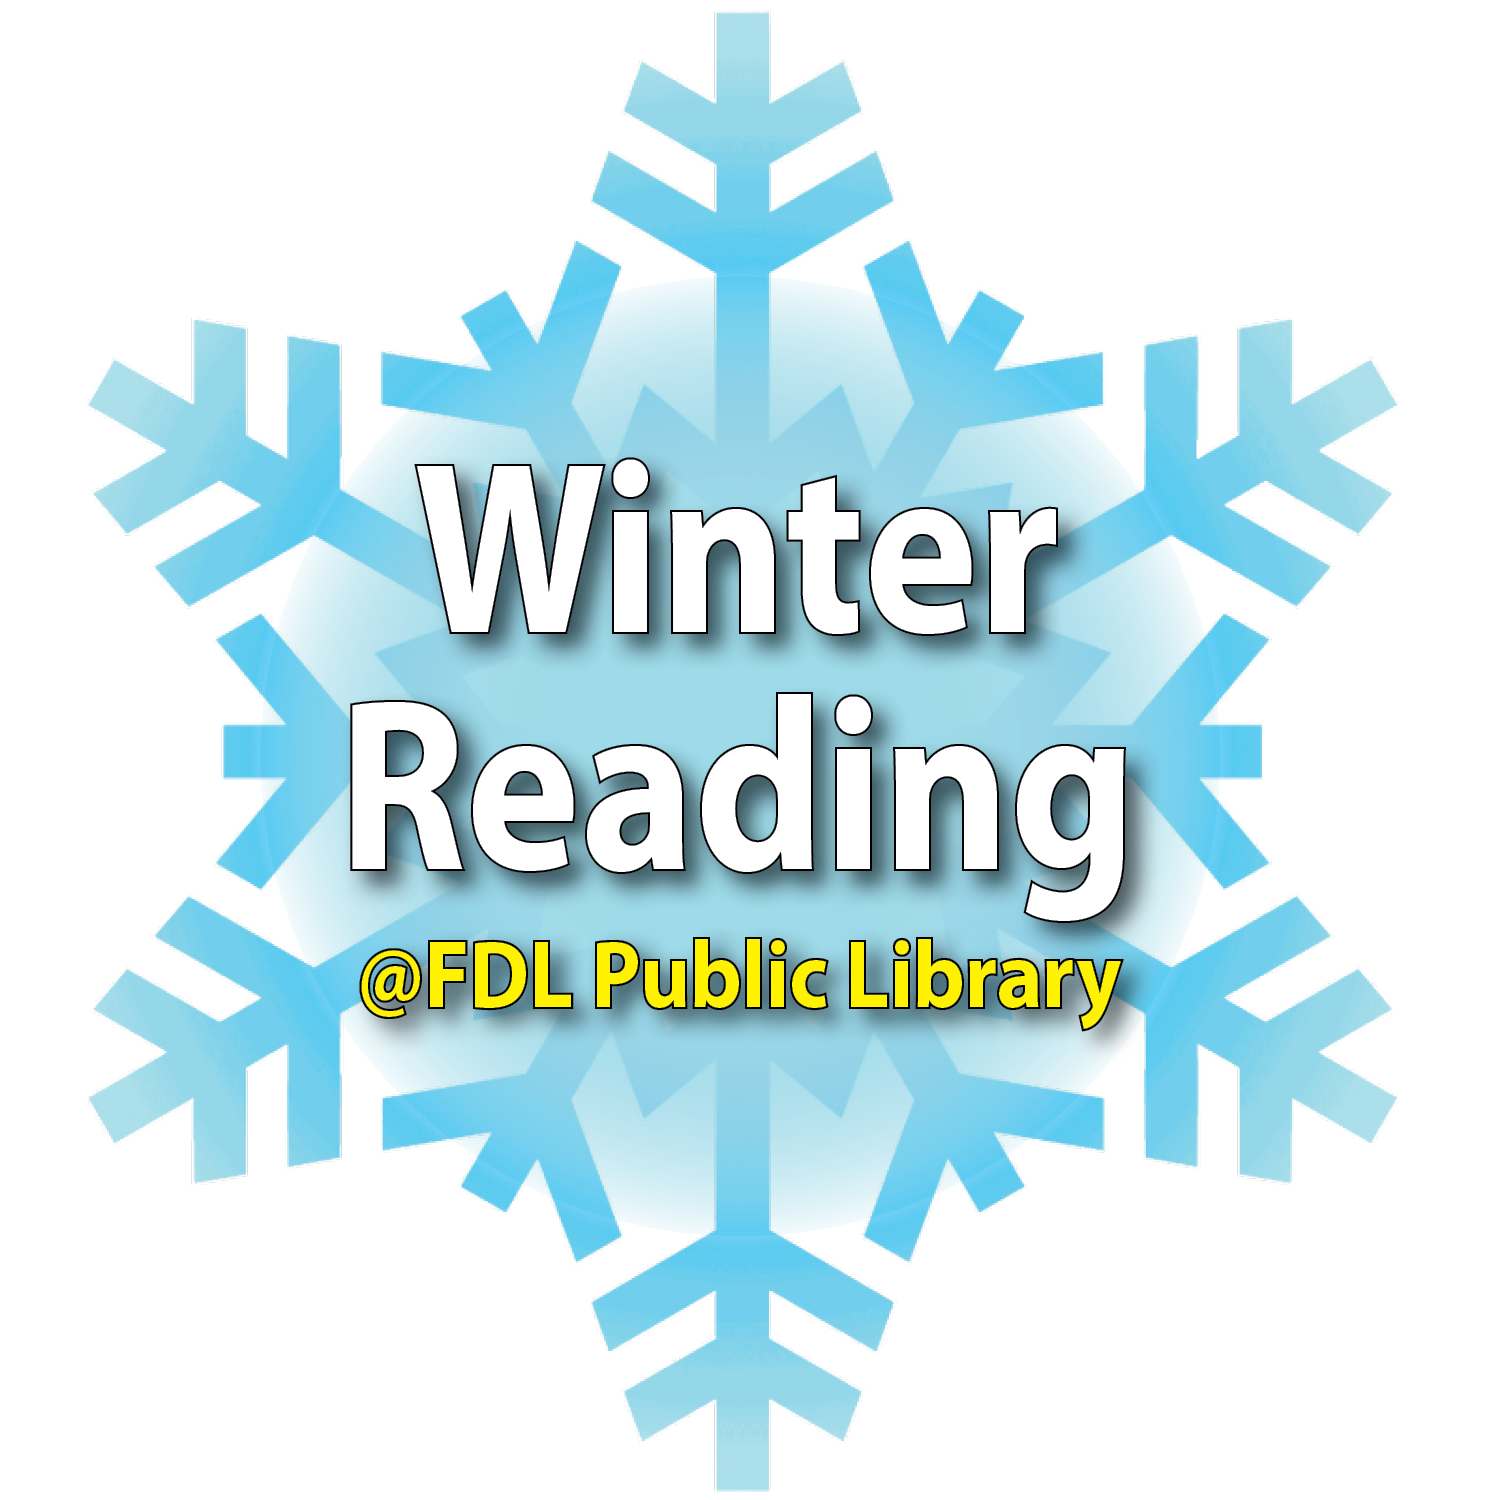 Winter Reading Program will heat up cold days with fun, prizes